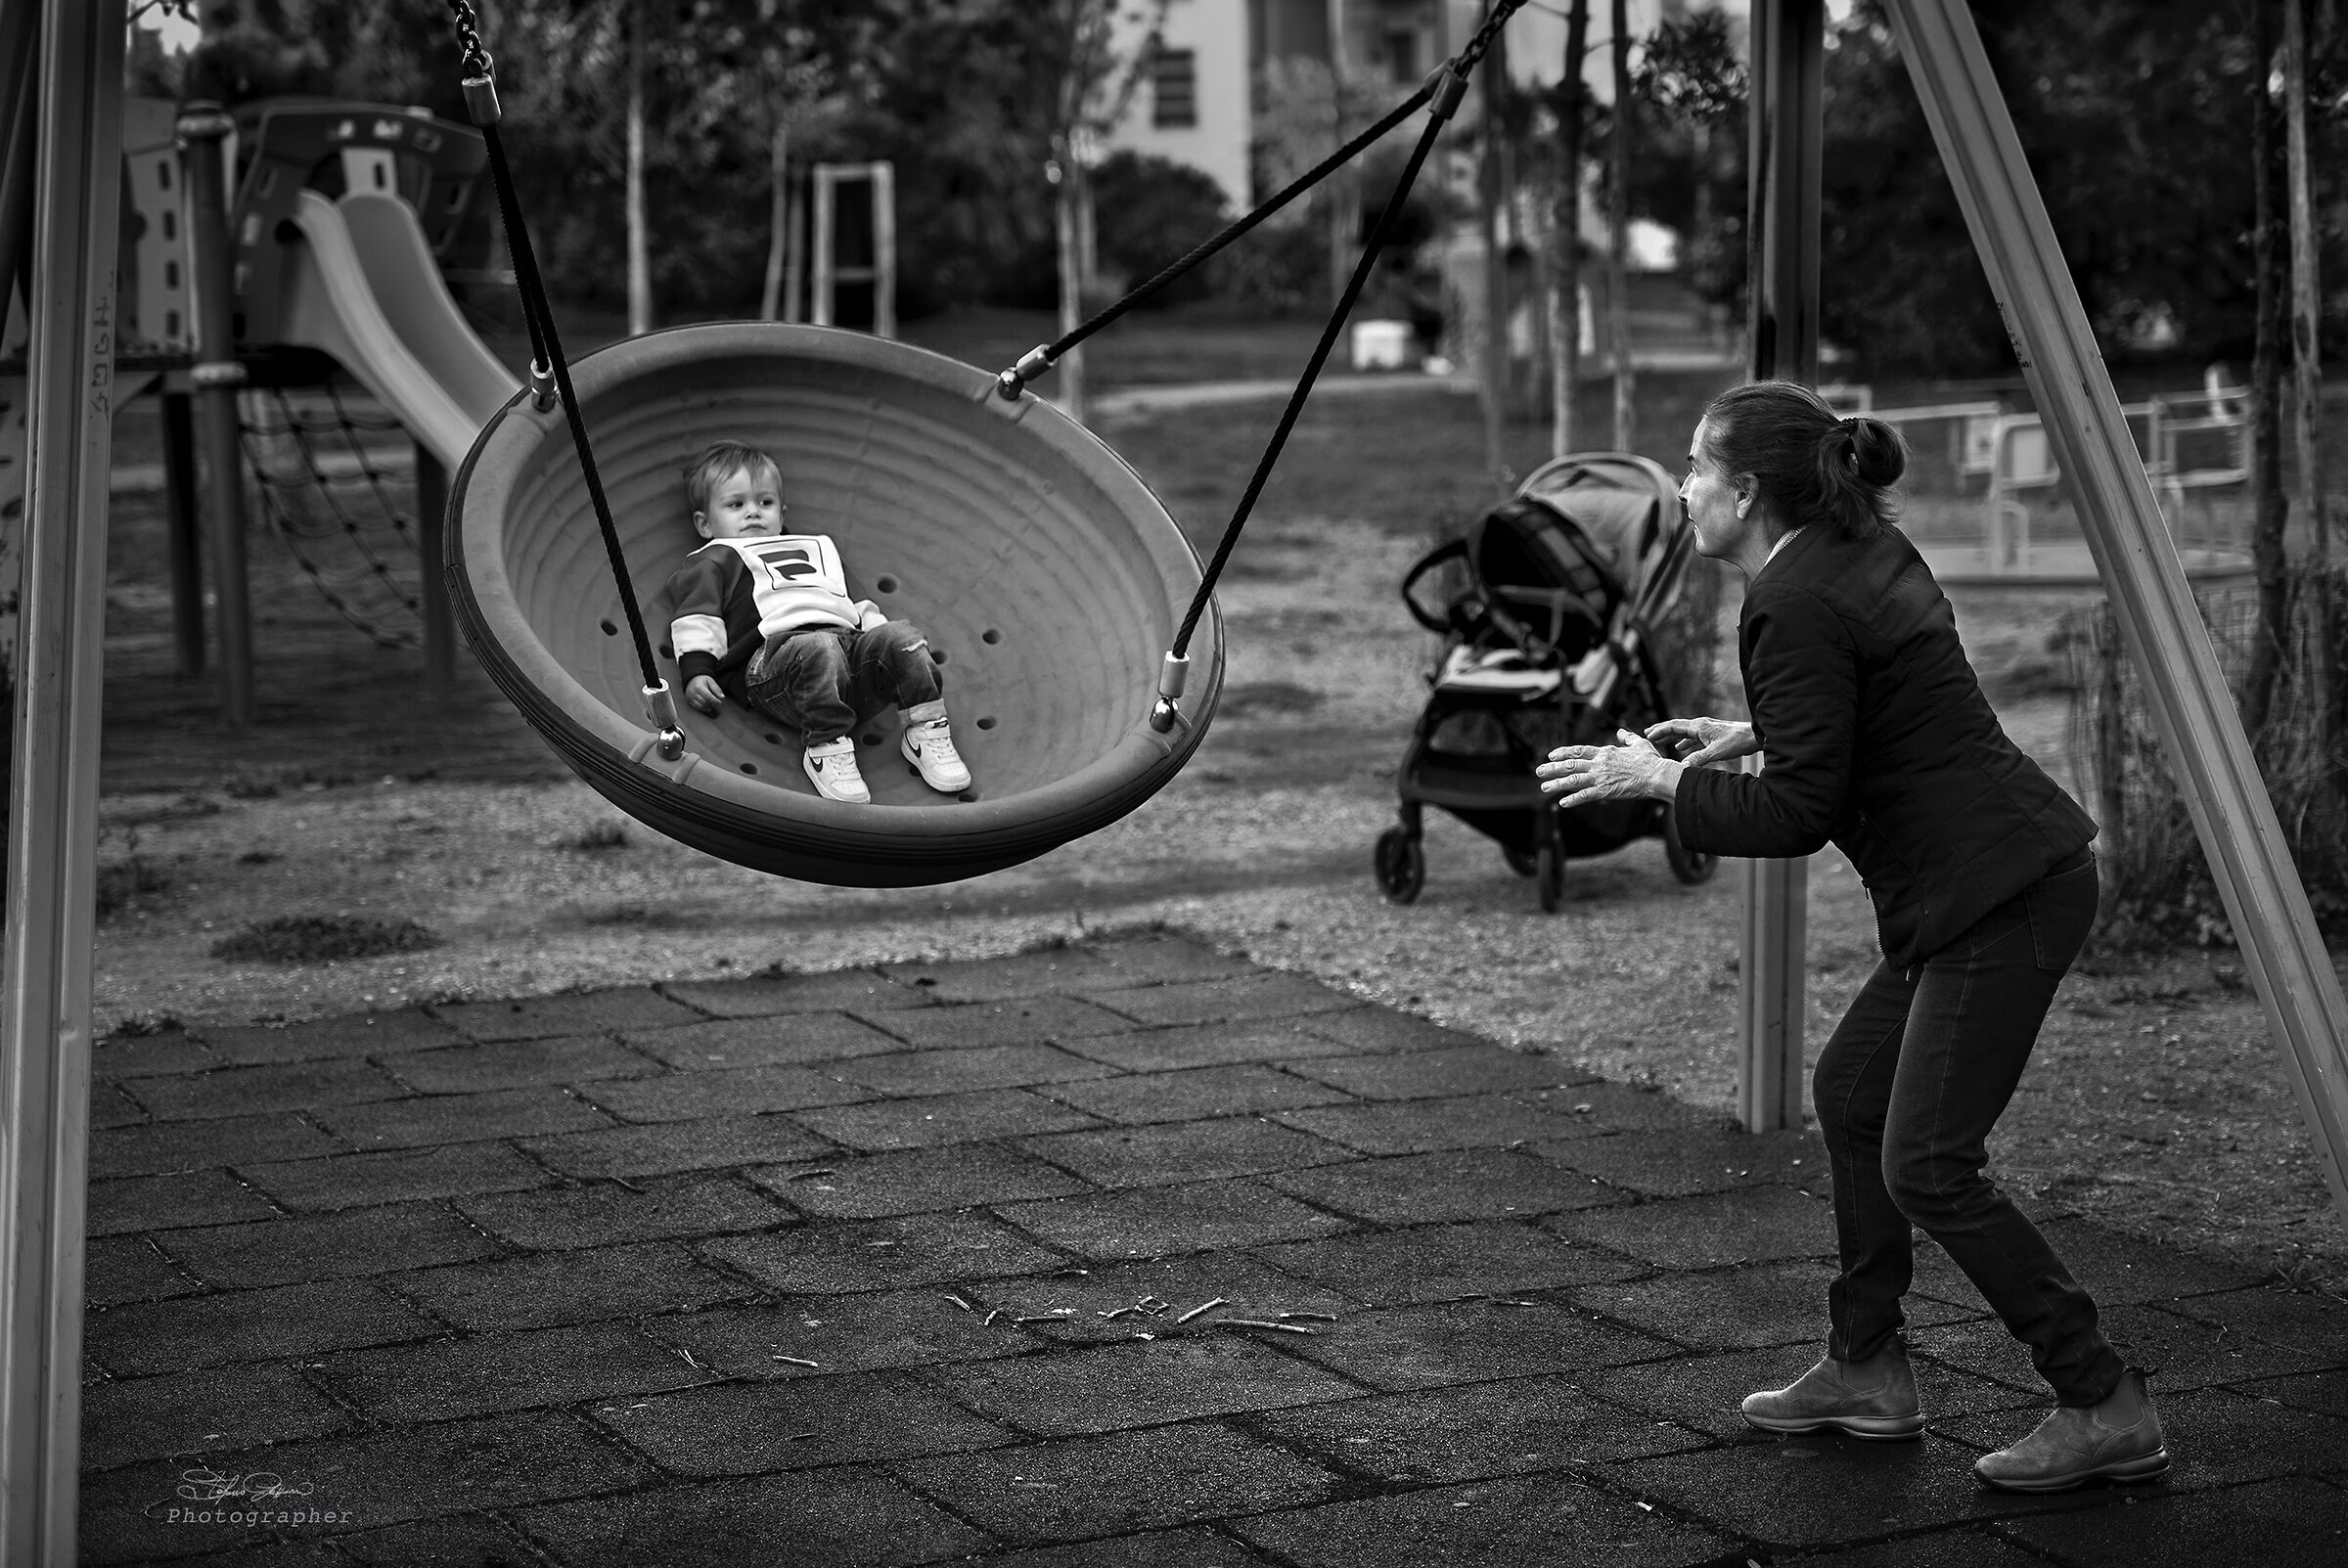 A day at the playground...